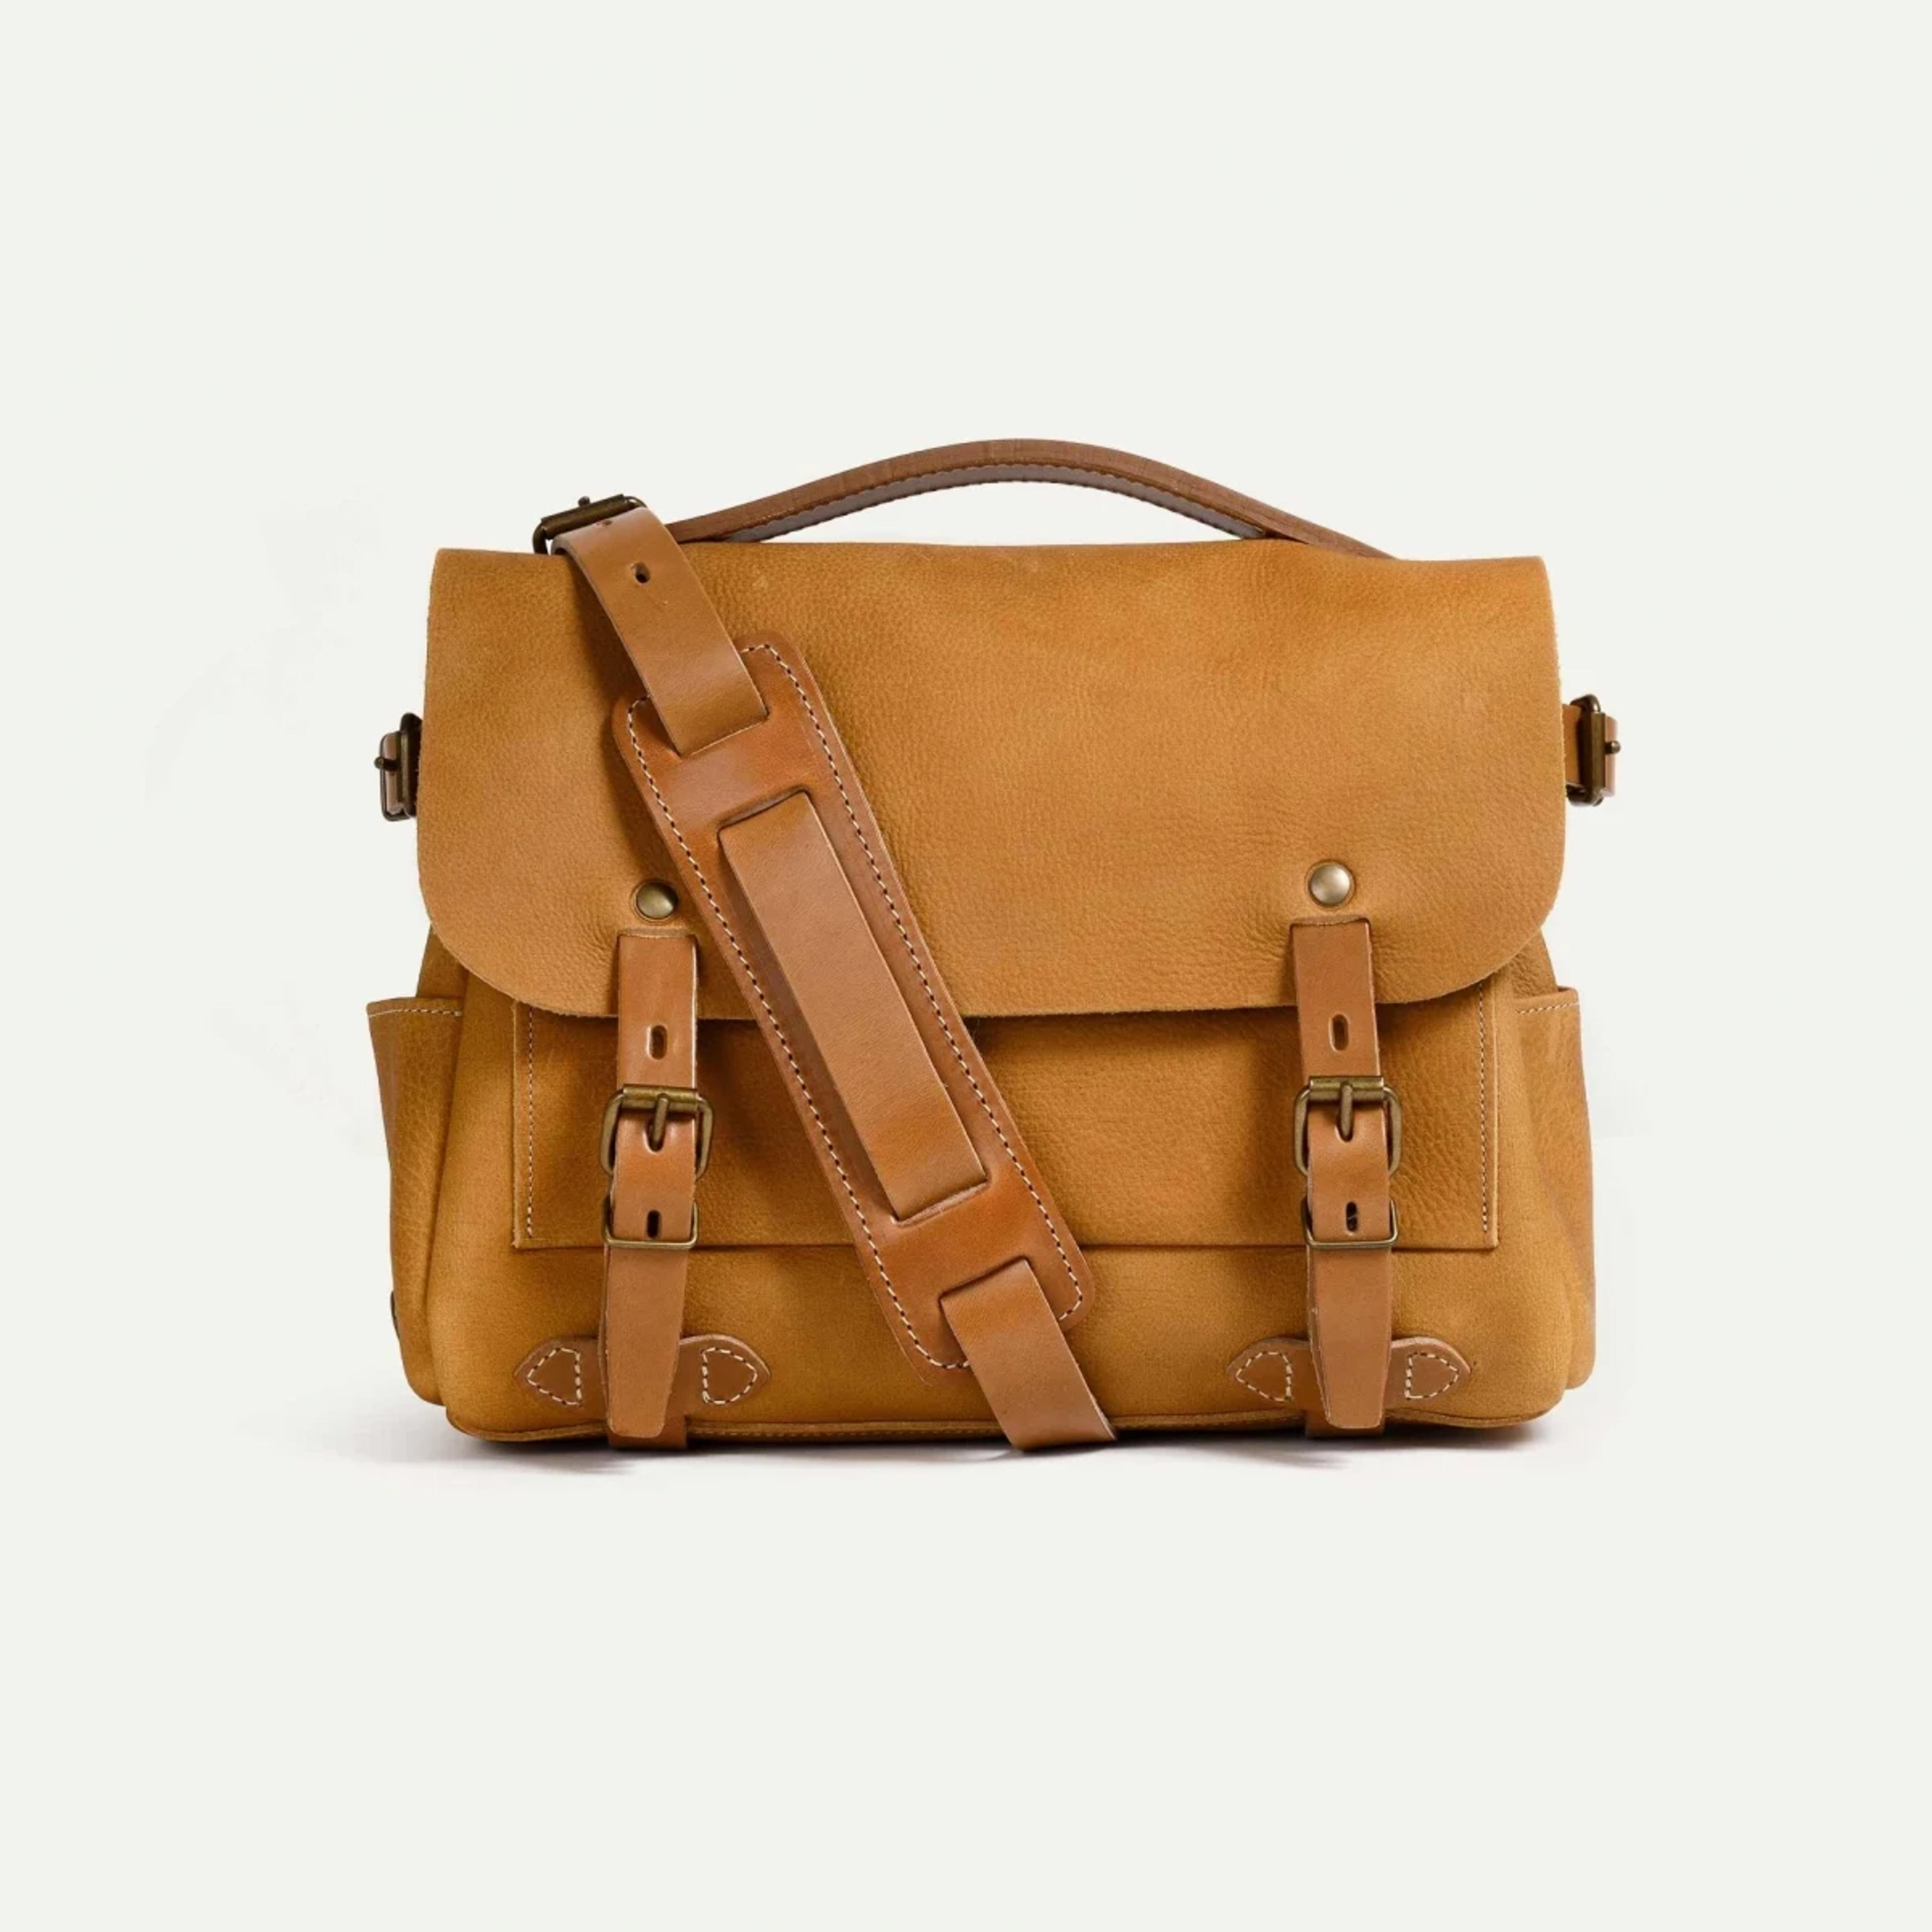 Postman bag Éclair S - Honey / Waxed Leather - Messenger bag - Made in France